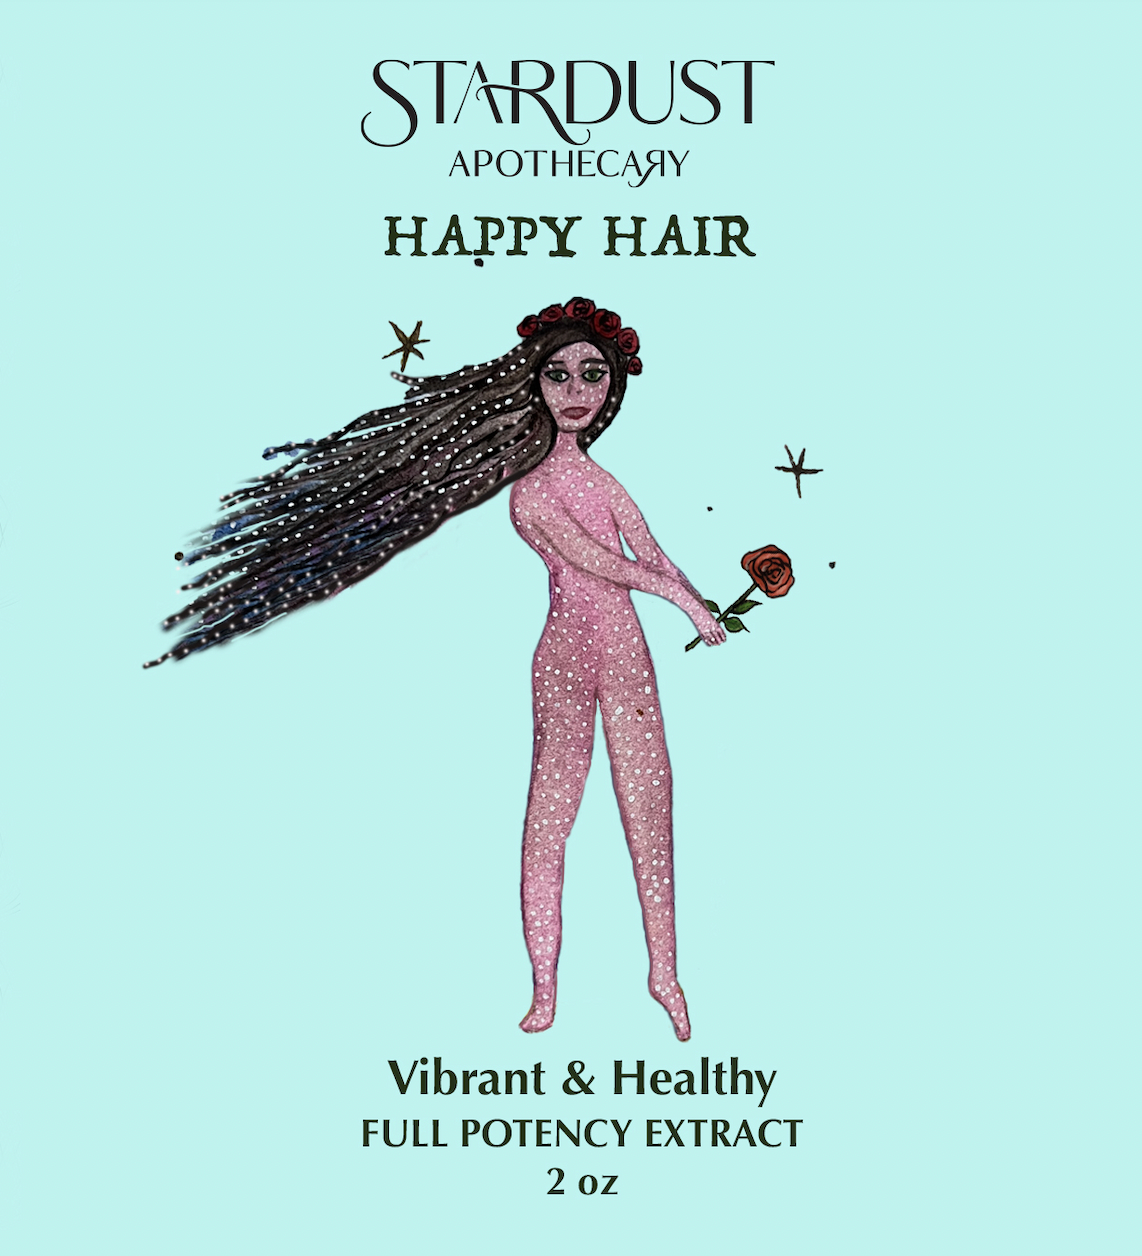 Happy Hair 🦄 For vibrant and healthy hair 🌹🌸🌿